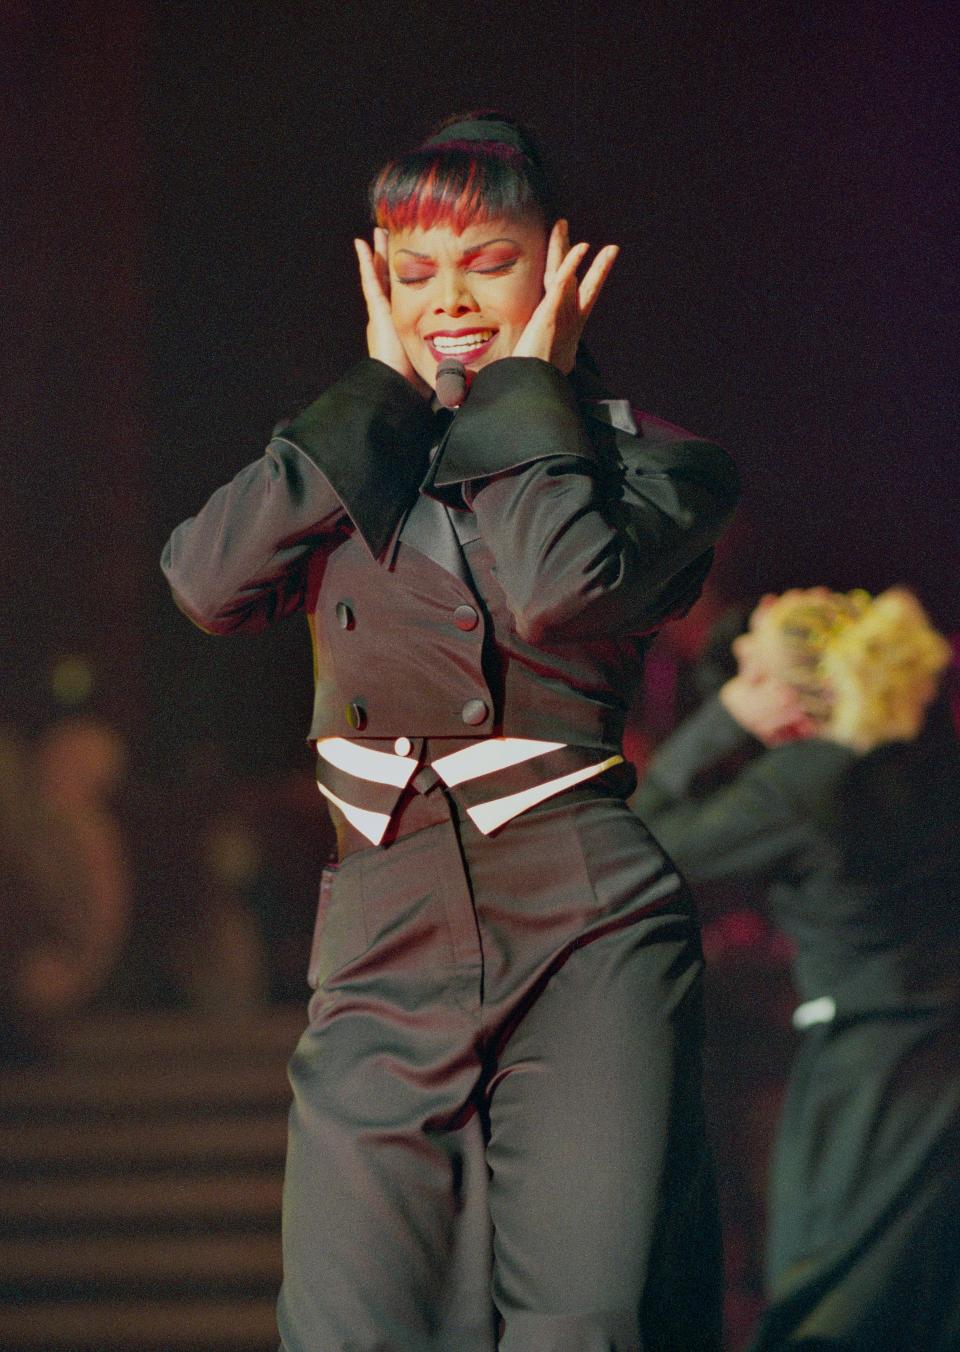 Janet Jackson performs on stage in 1998.